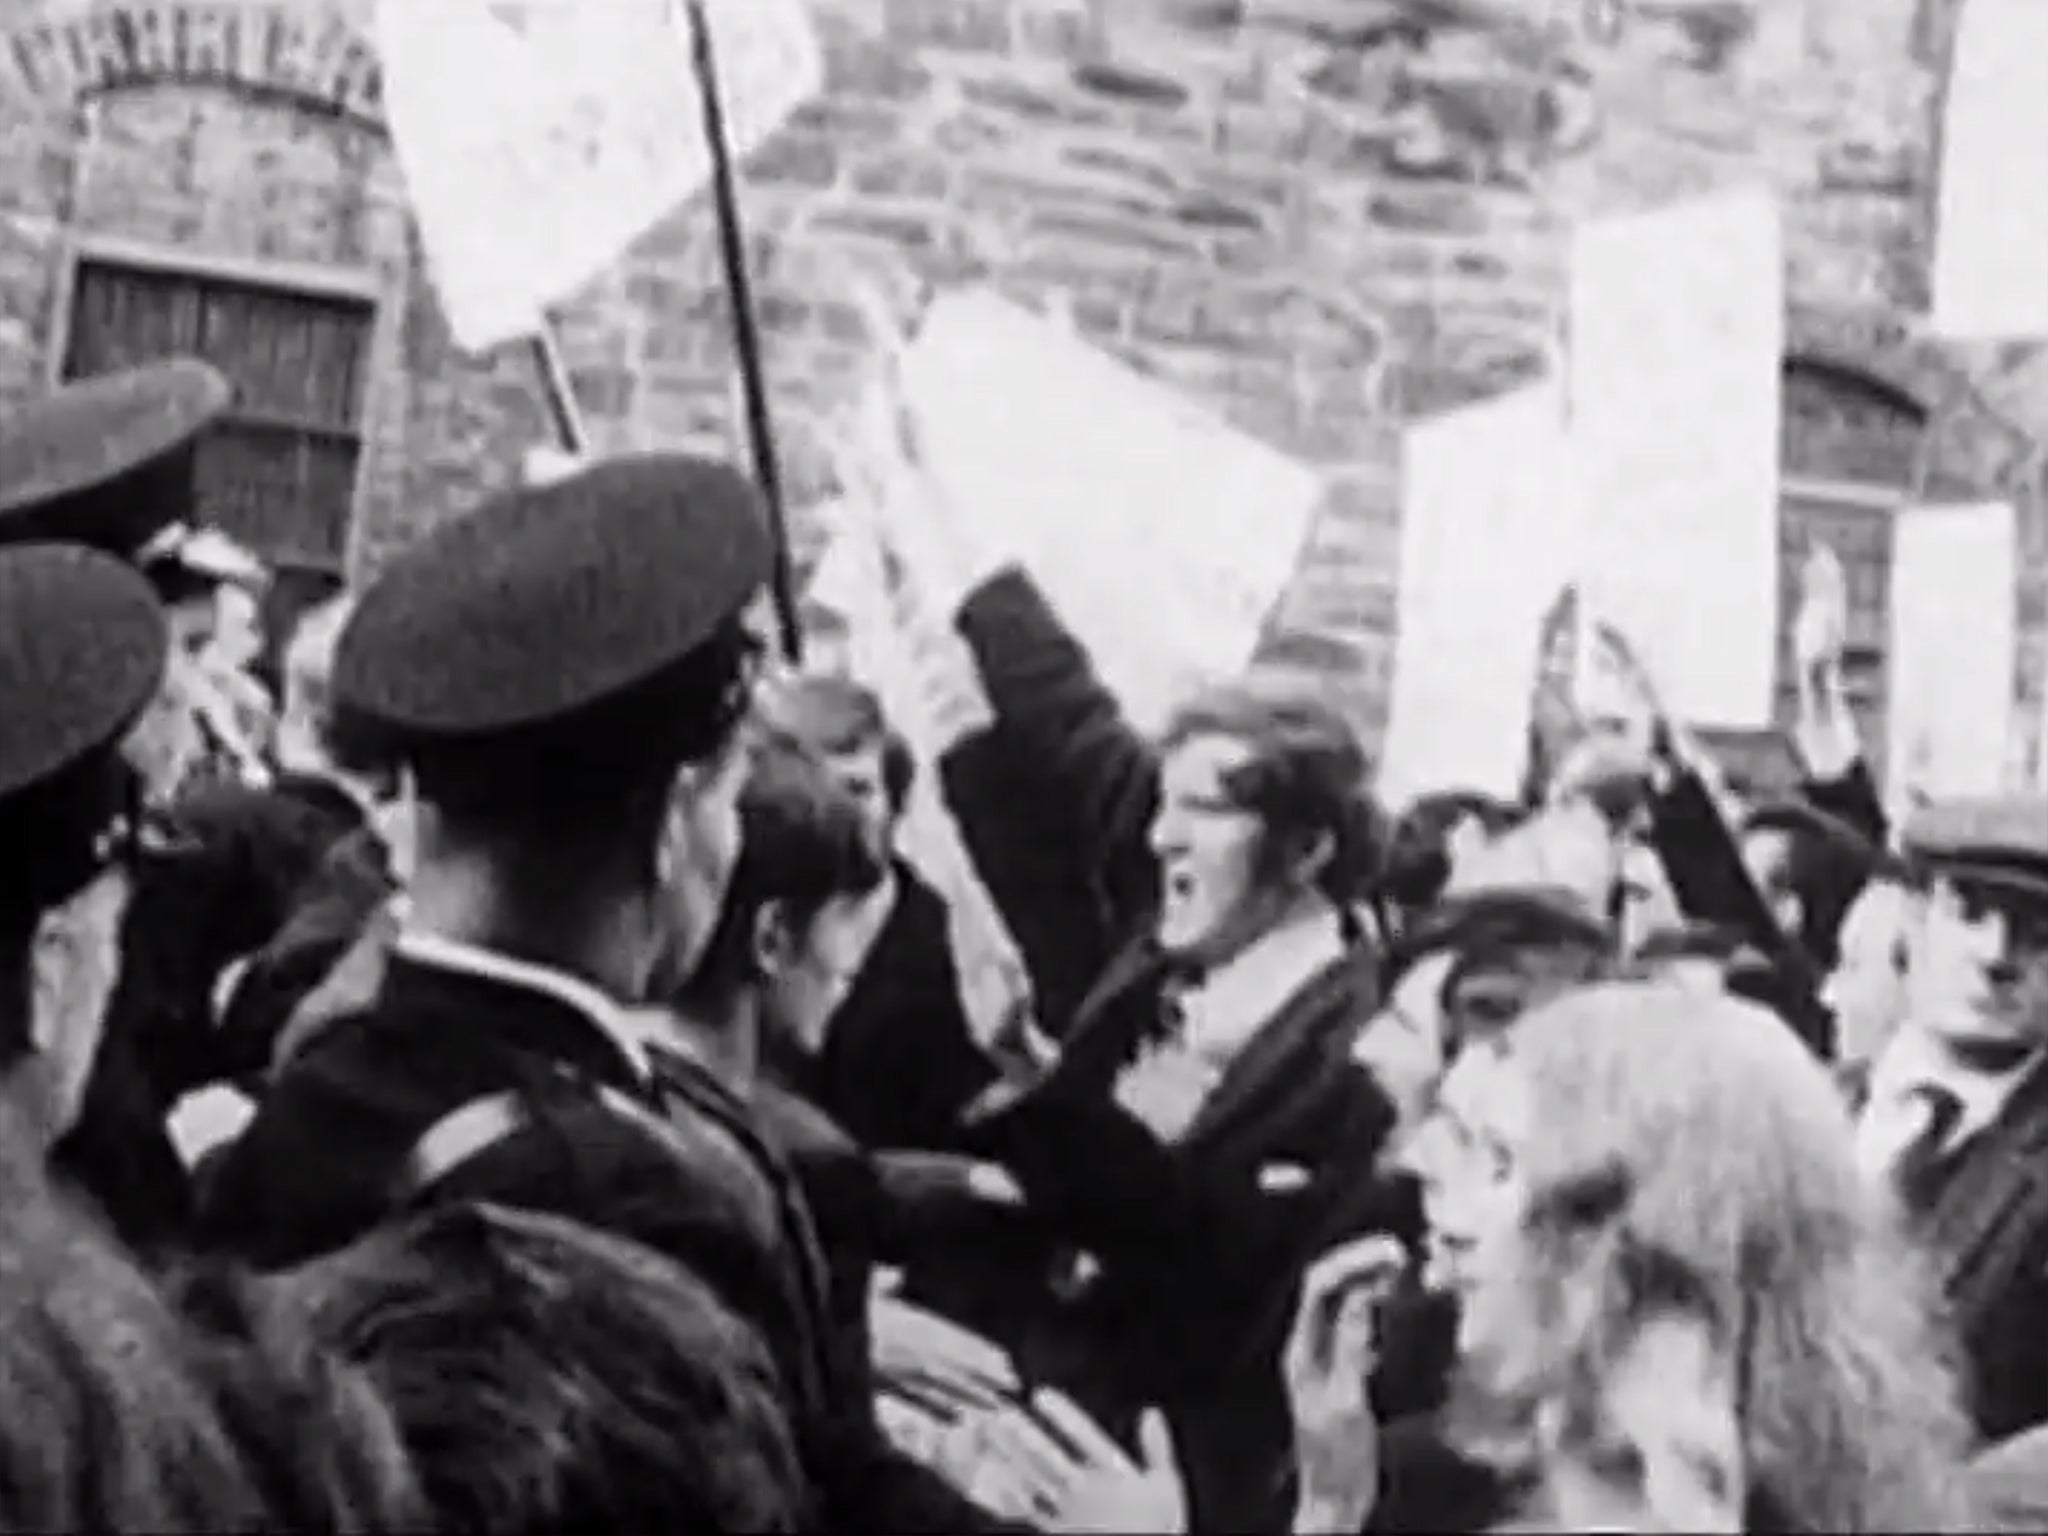 The Northern Ireland Civil Rights Association marching on the streets of Derry in 1968